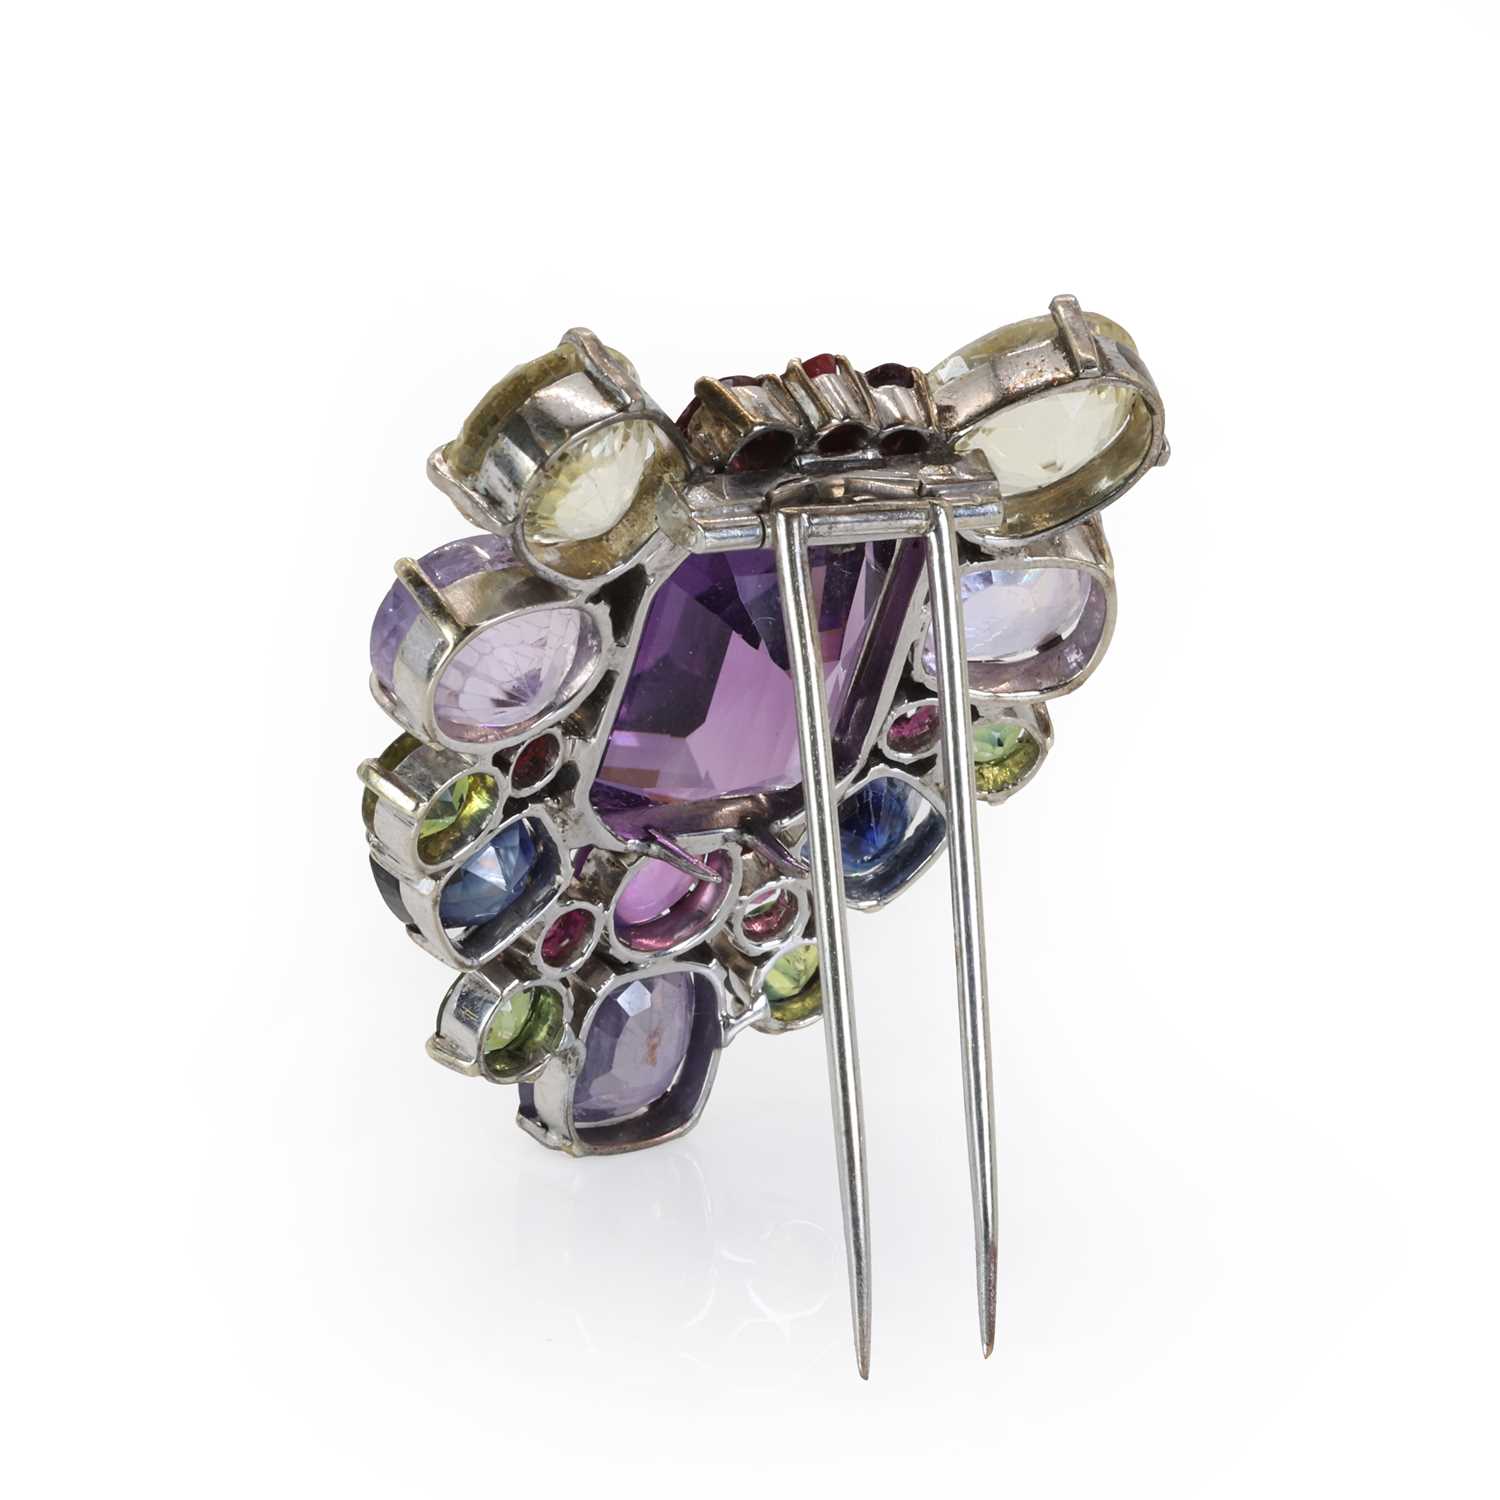 A varicoloured sapphire and amethyst clip brooch, c.1940-1950, - Image 2 of 3